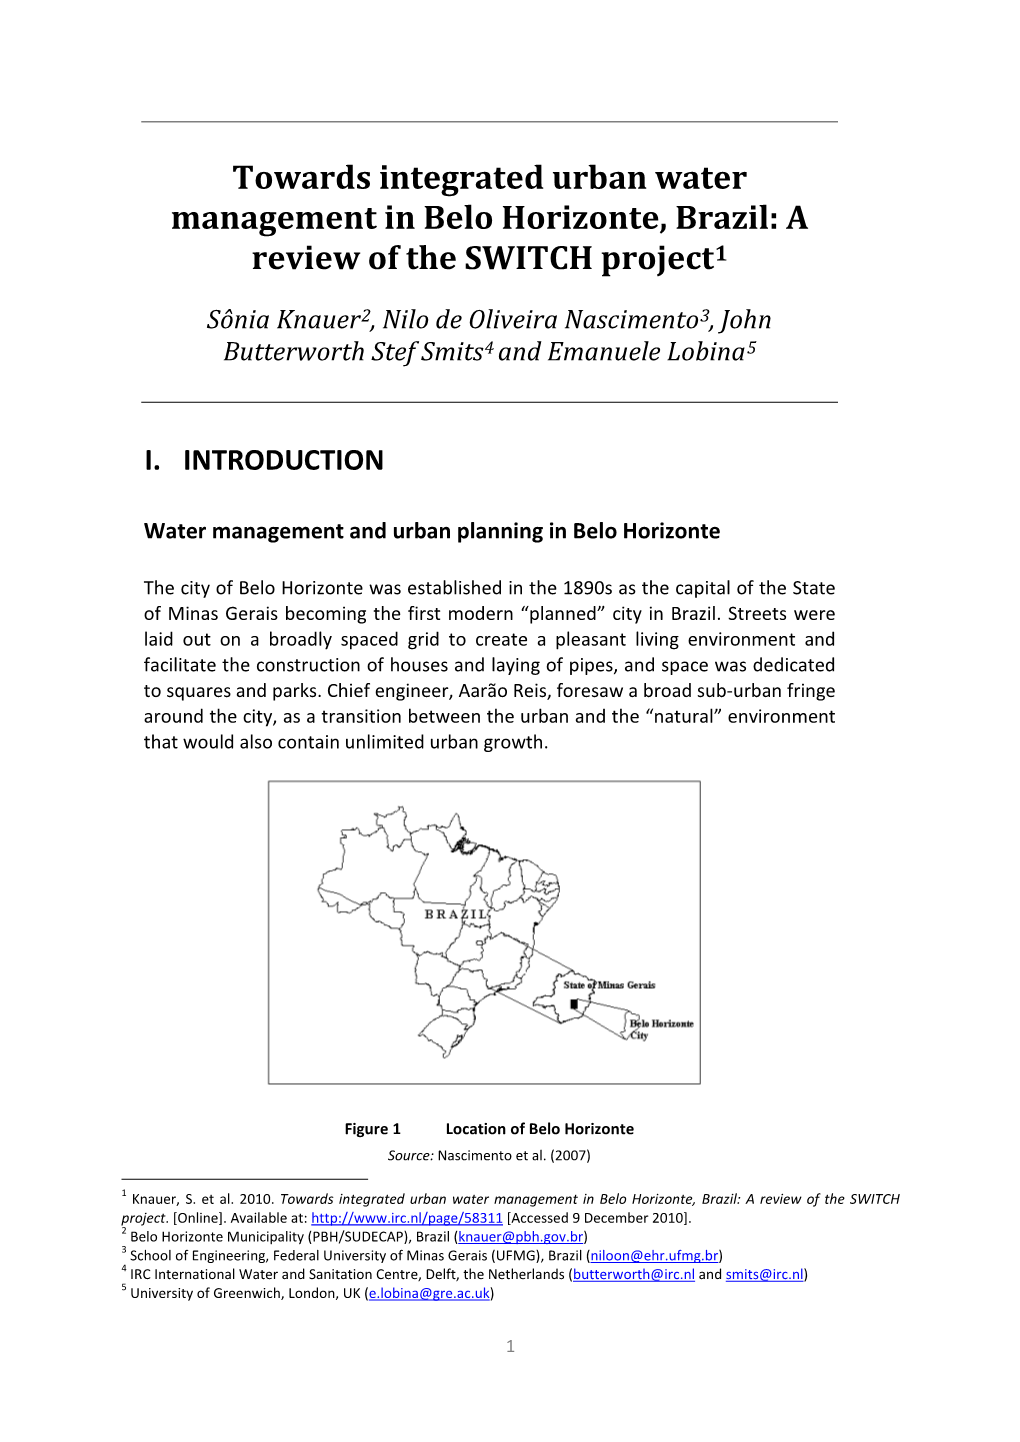 Belo Horizonte, Brazil: a Review of the SWITCH Project1